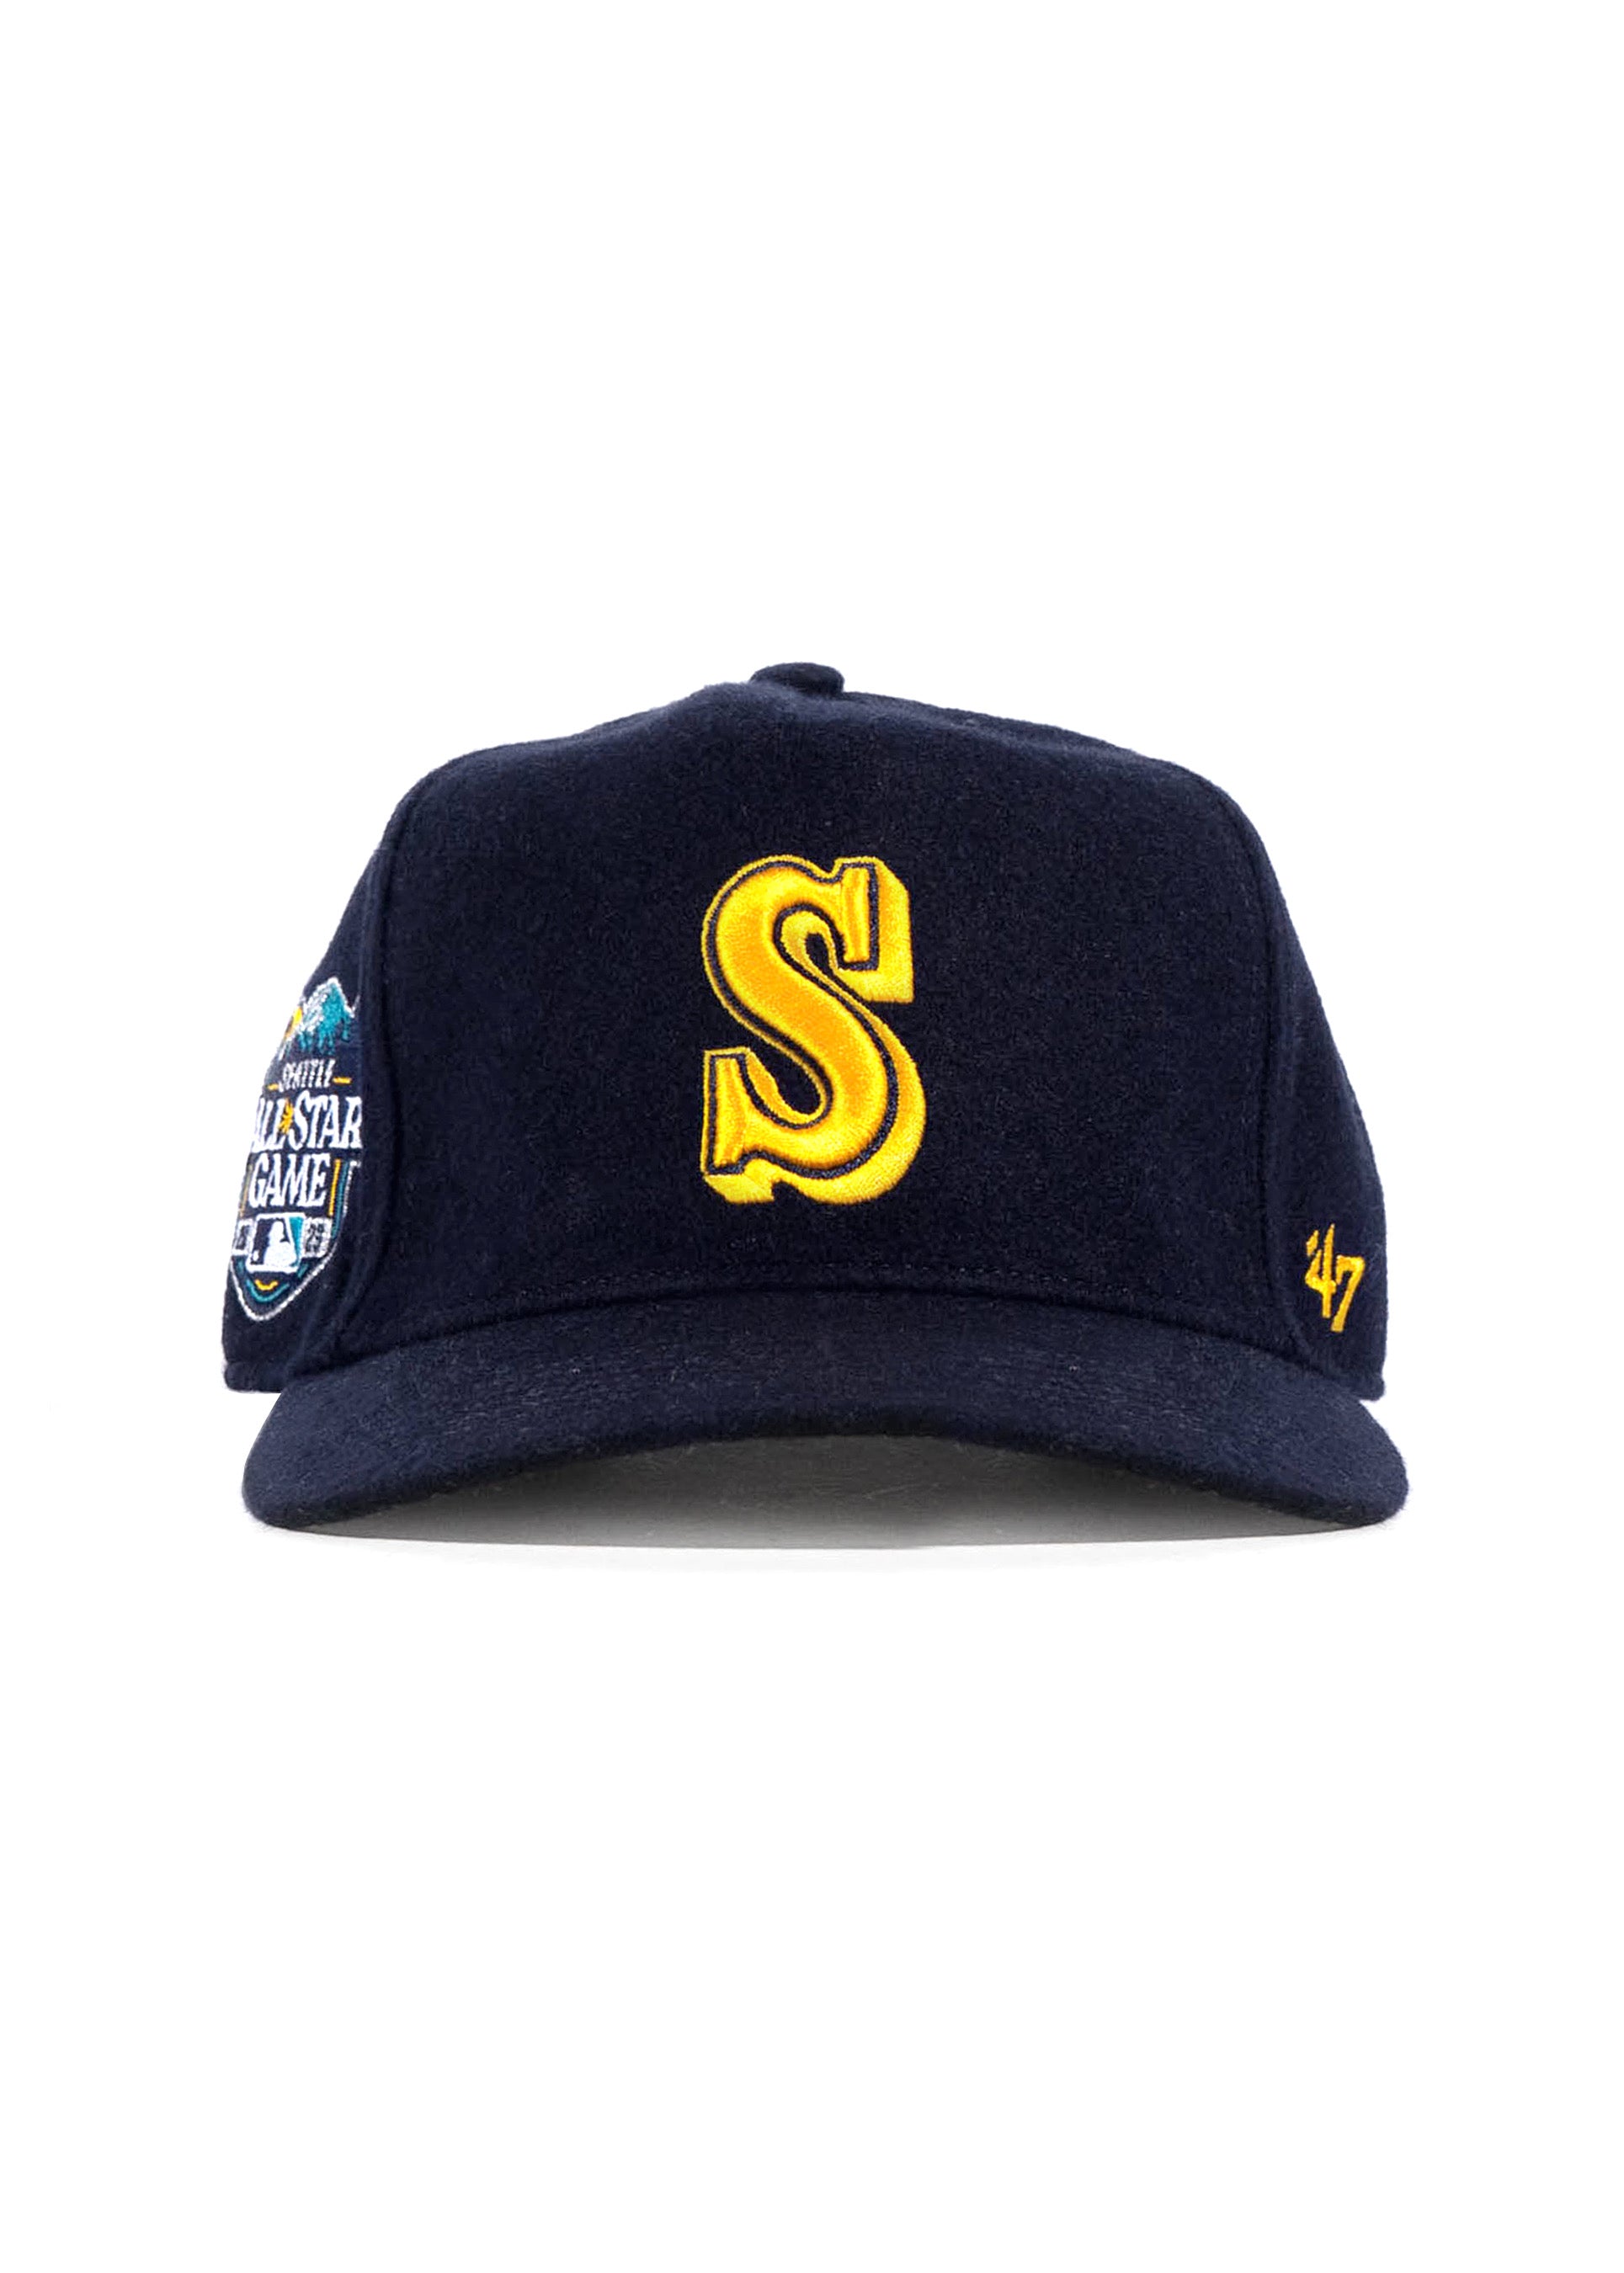 Mariners '47 HITCH - Navy